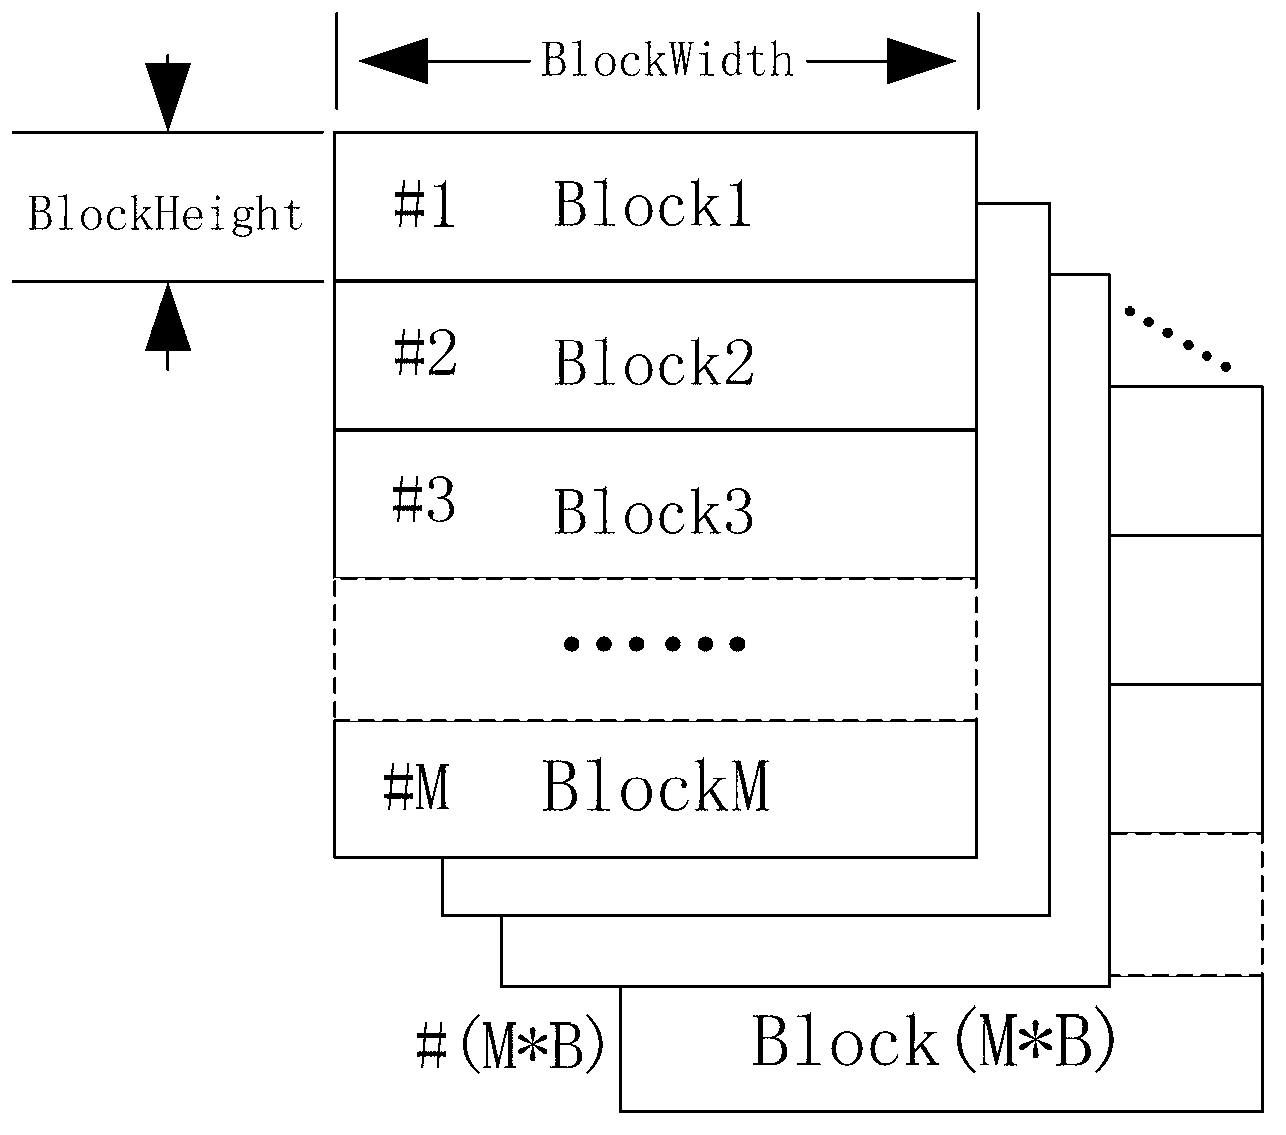 IO (Input Output) double-buffer interactive multicore processing method for remote sensing image